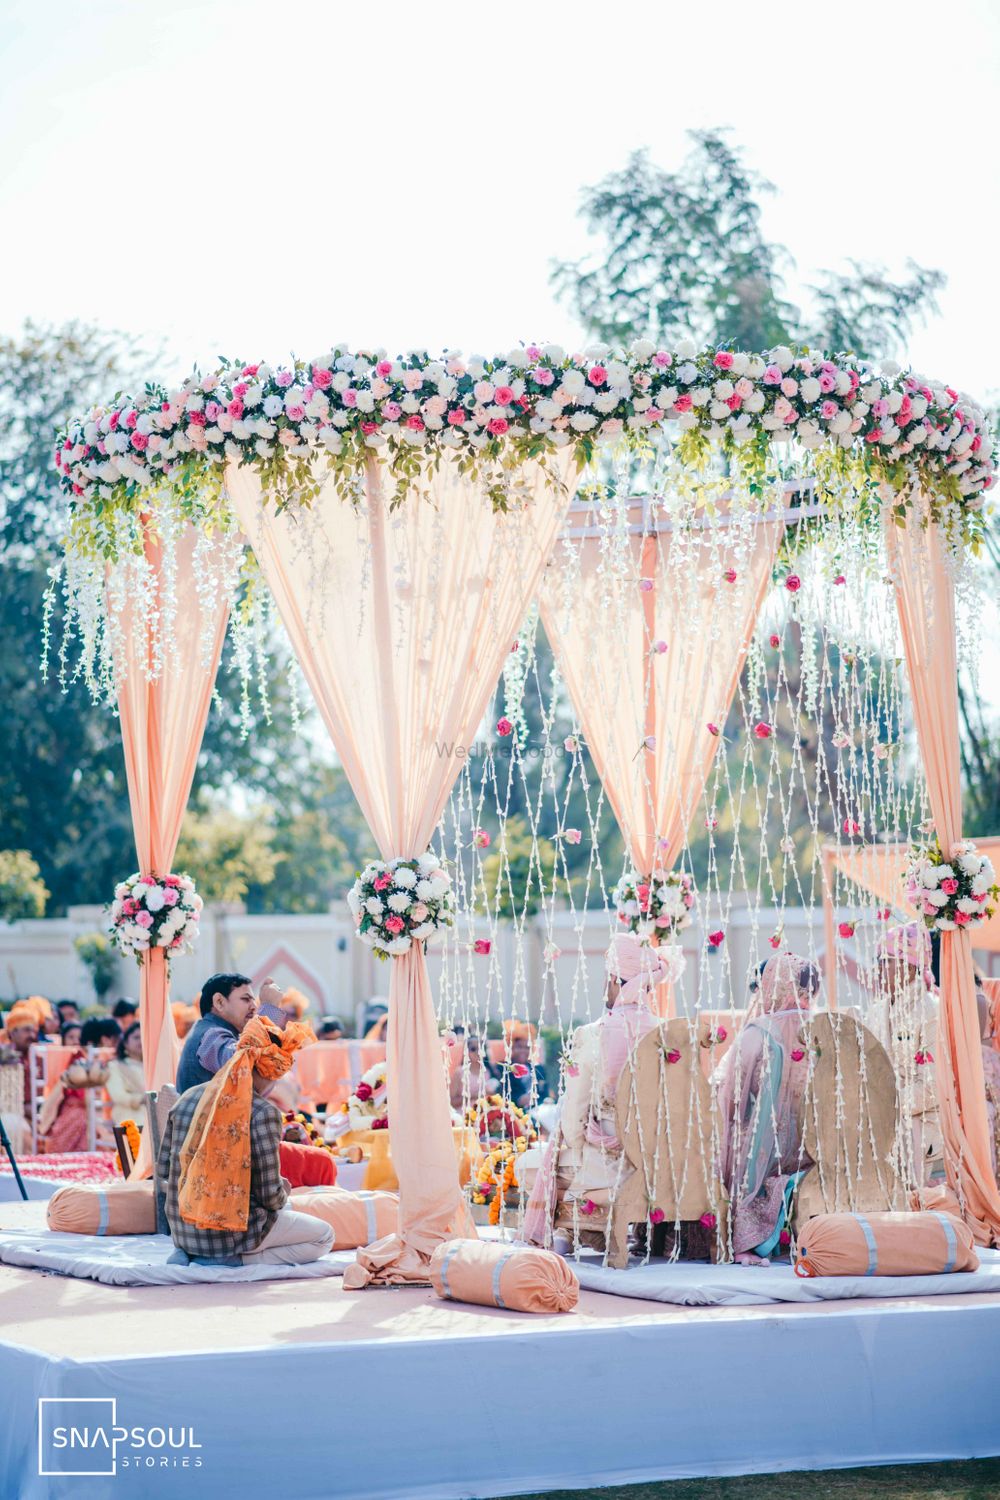 Photo of Floral round mandap decor ideas for day wedding.